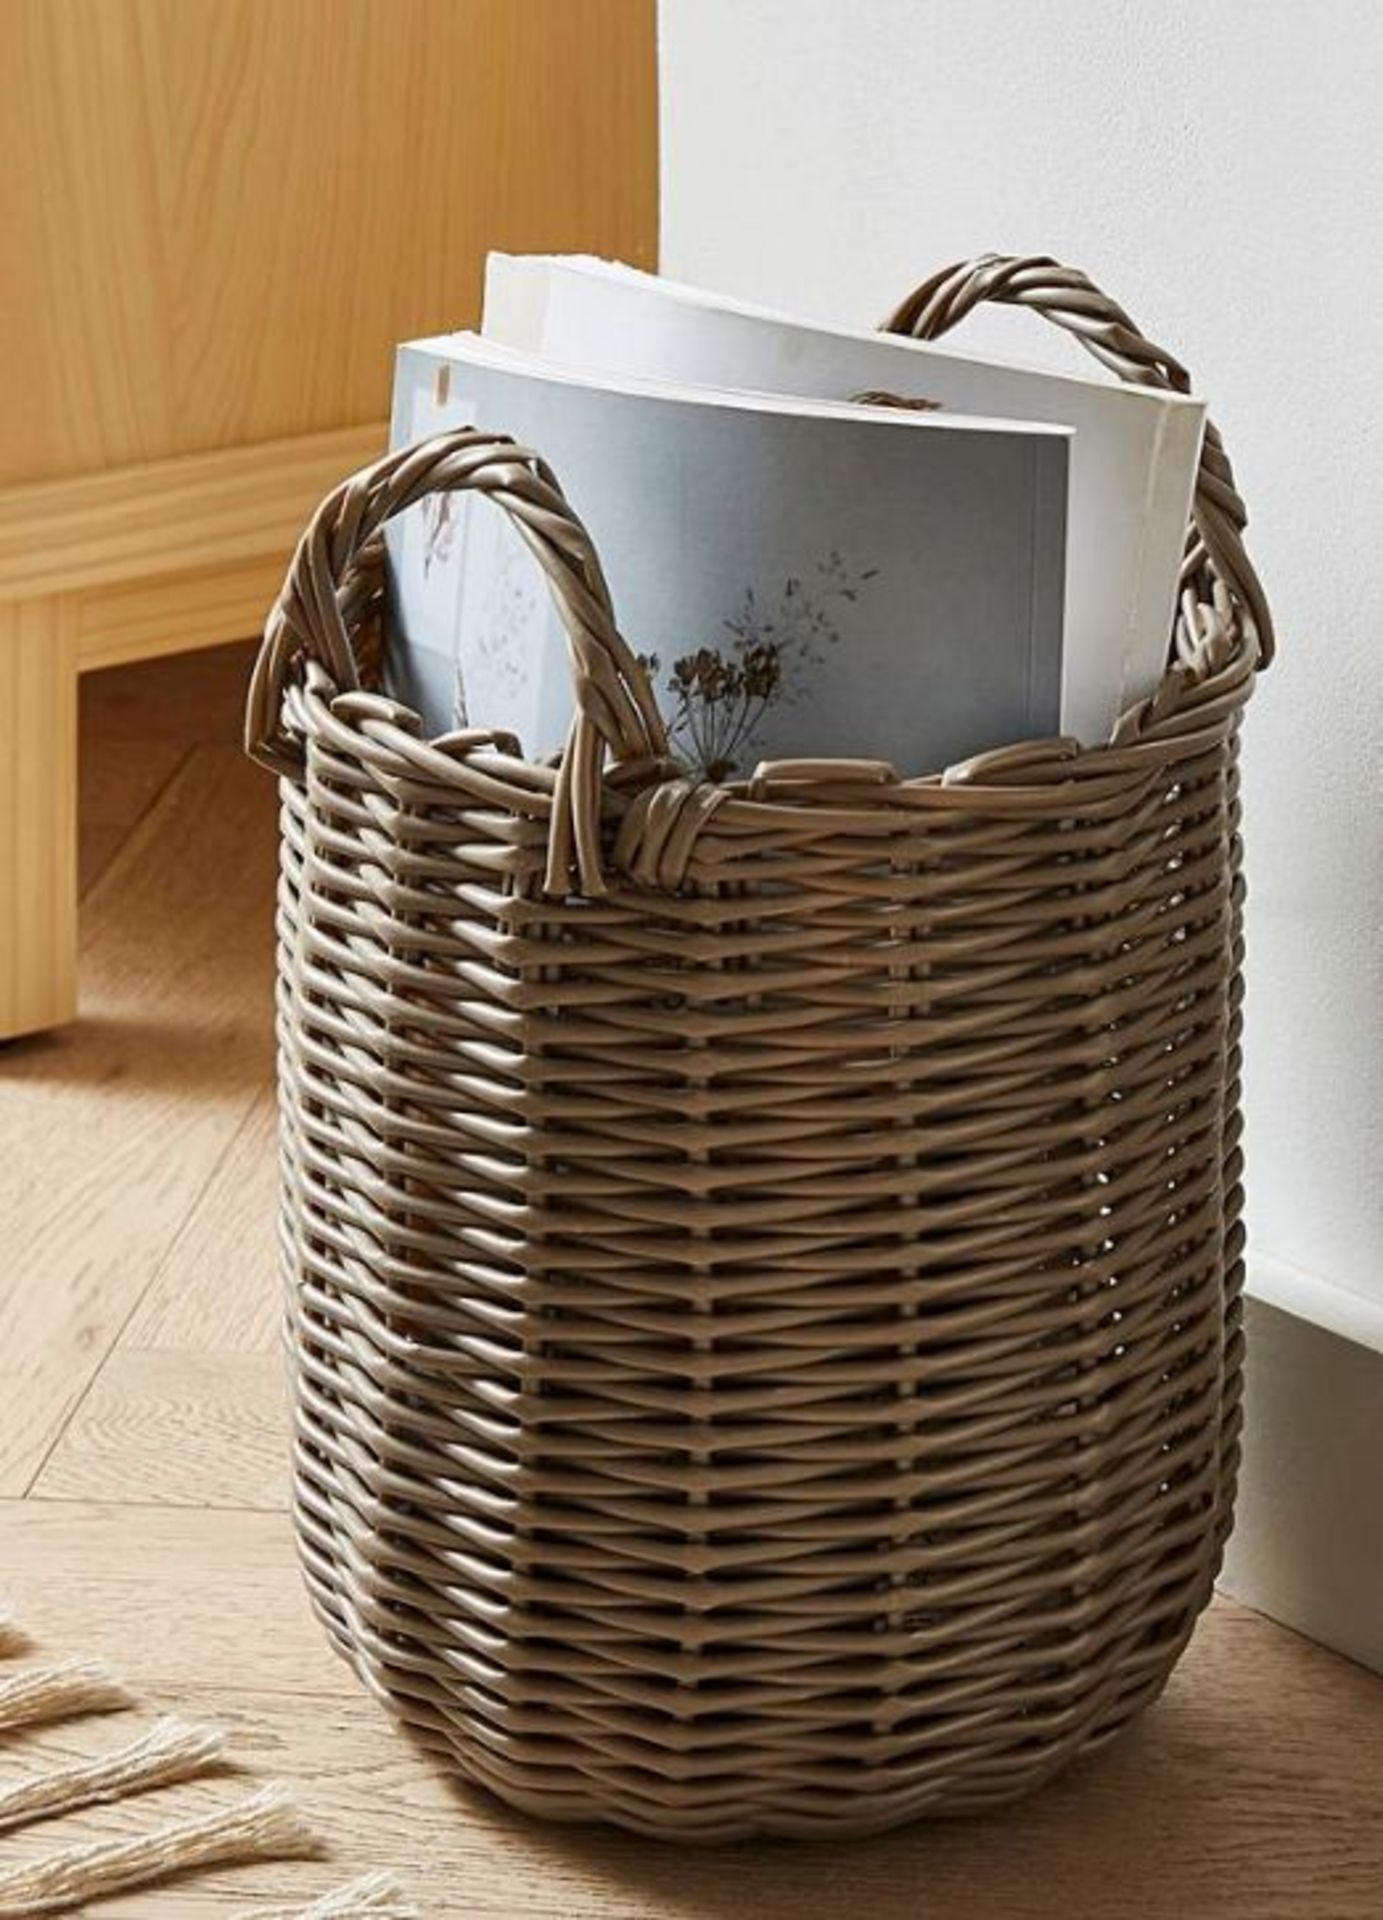 Woven Belly Basket. - ER22. This storage basket will sit perfectly in any living space, it is an